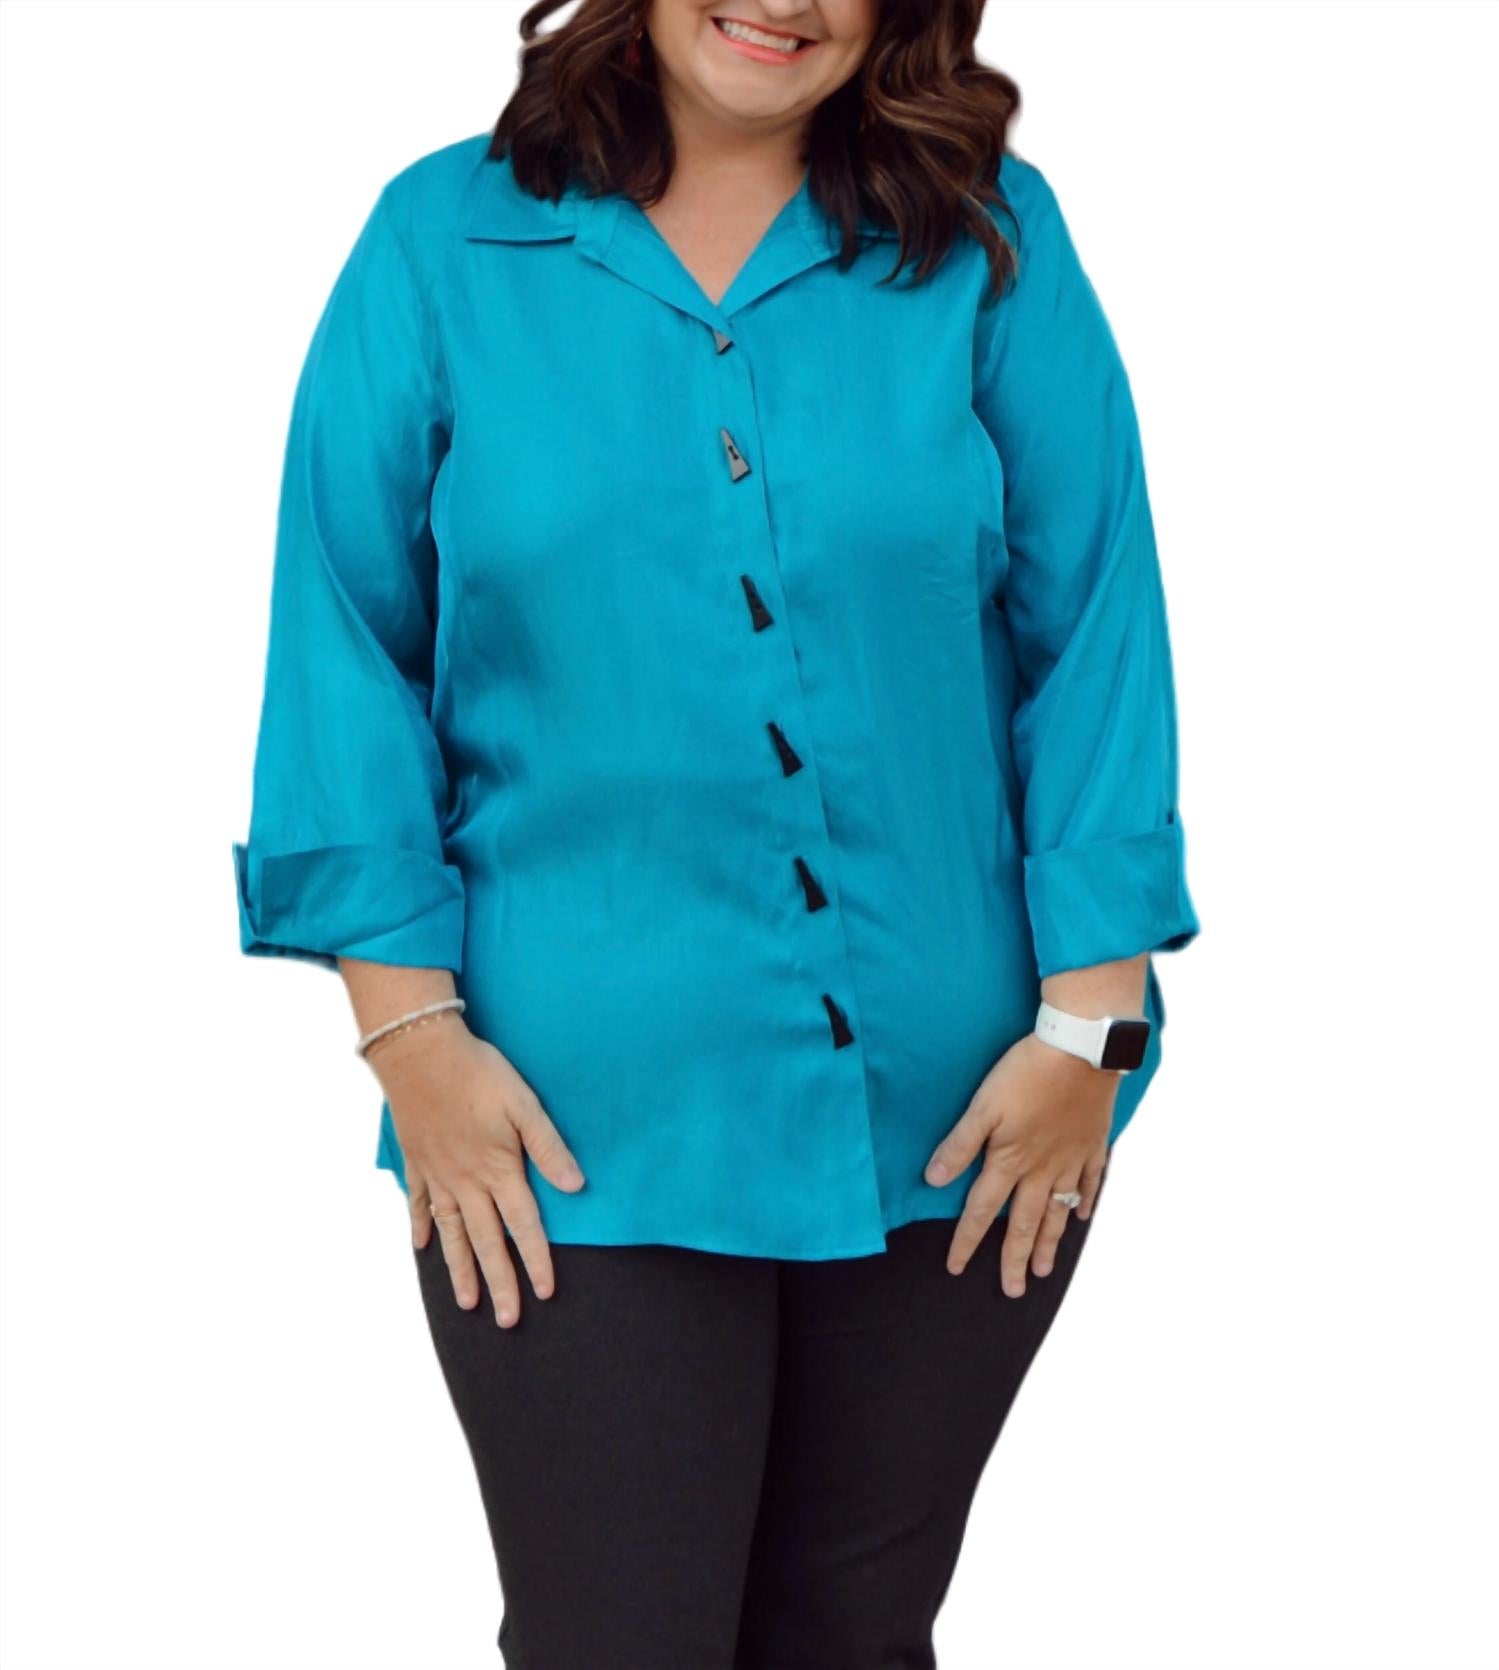 Multiples Turn-up Cuff Button Front High Low Shirt In Bright Teal In Multi